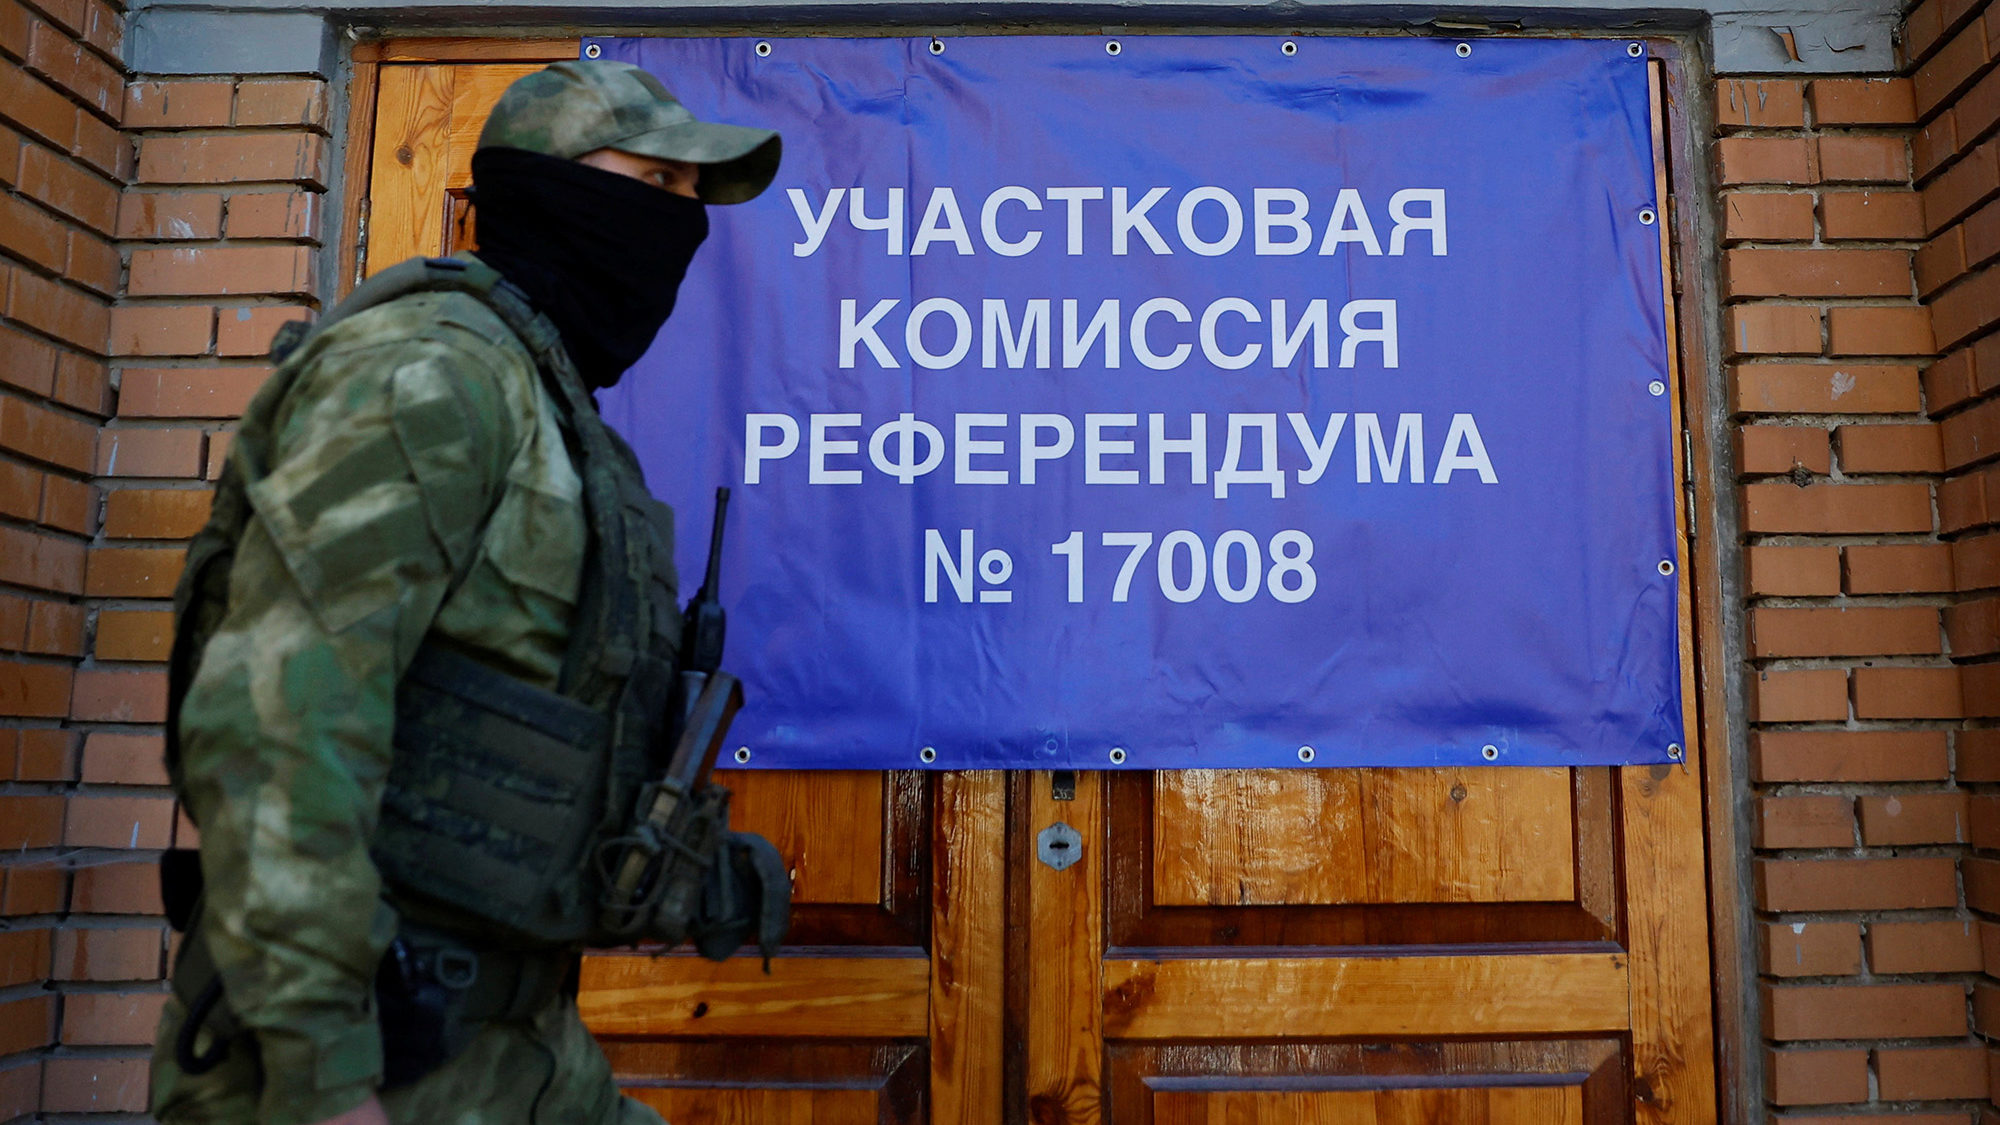 A service member of the self-proclaimed Donetsk People's Republic walks past a banner on the doors ...